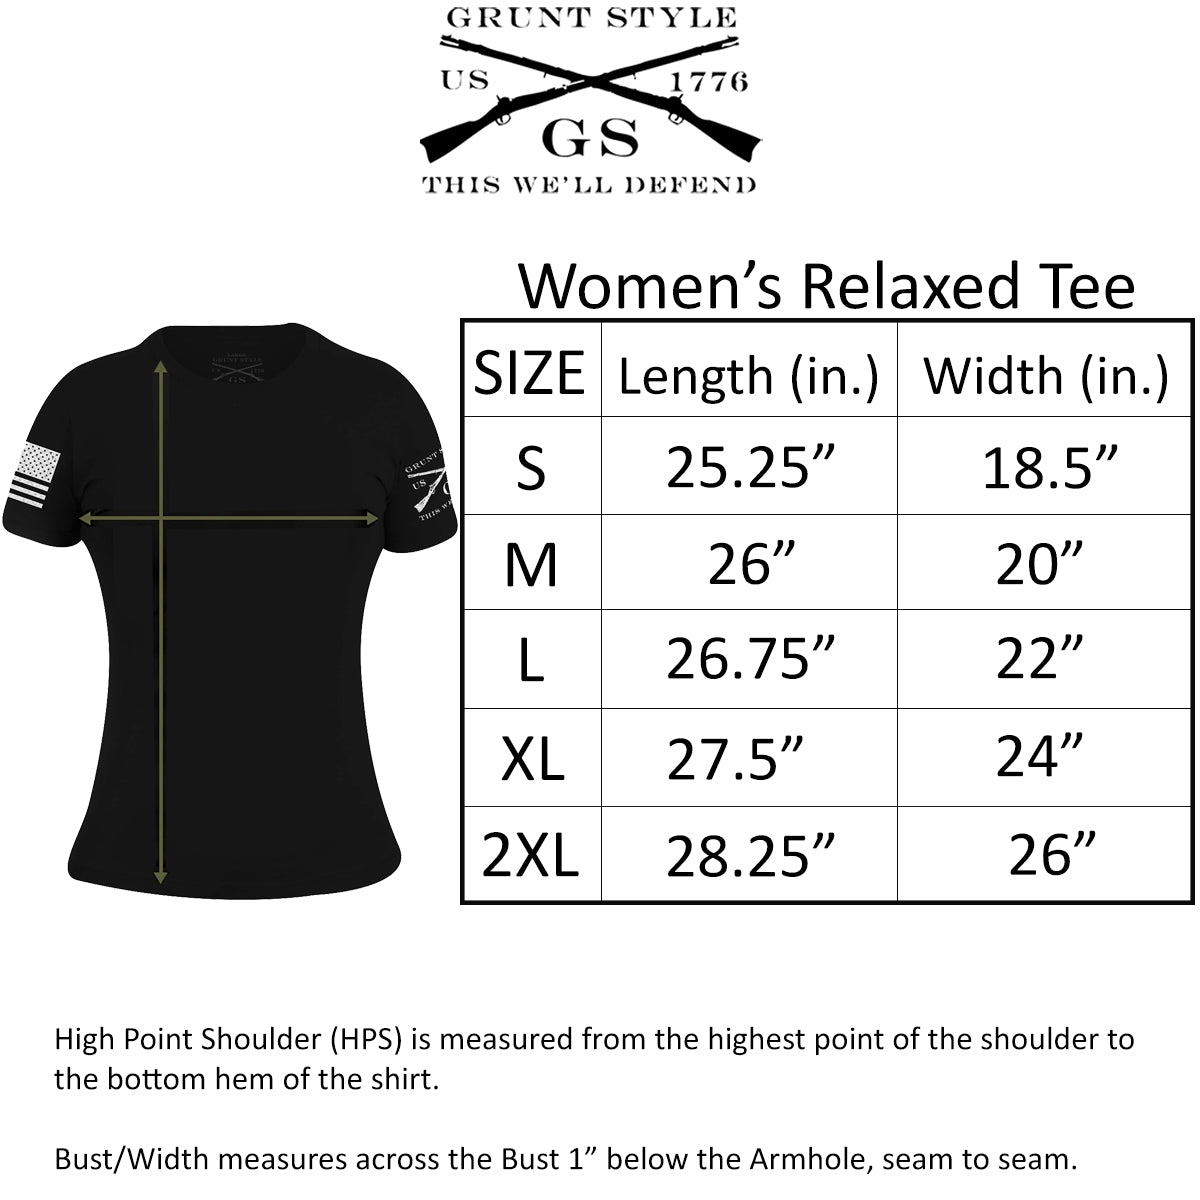 Grunt Style Women's Second Amendment 2.0 Relaxed Fit T-Shirt - Black Grunt Style